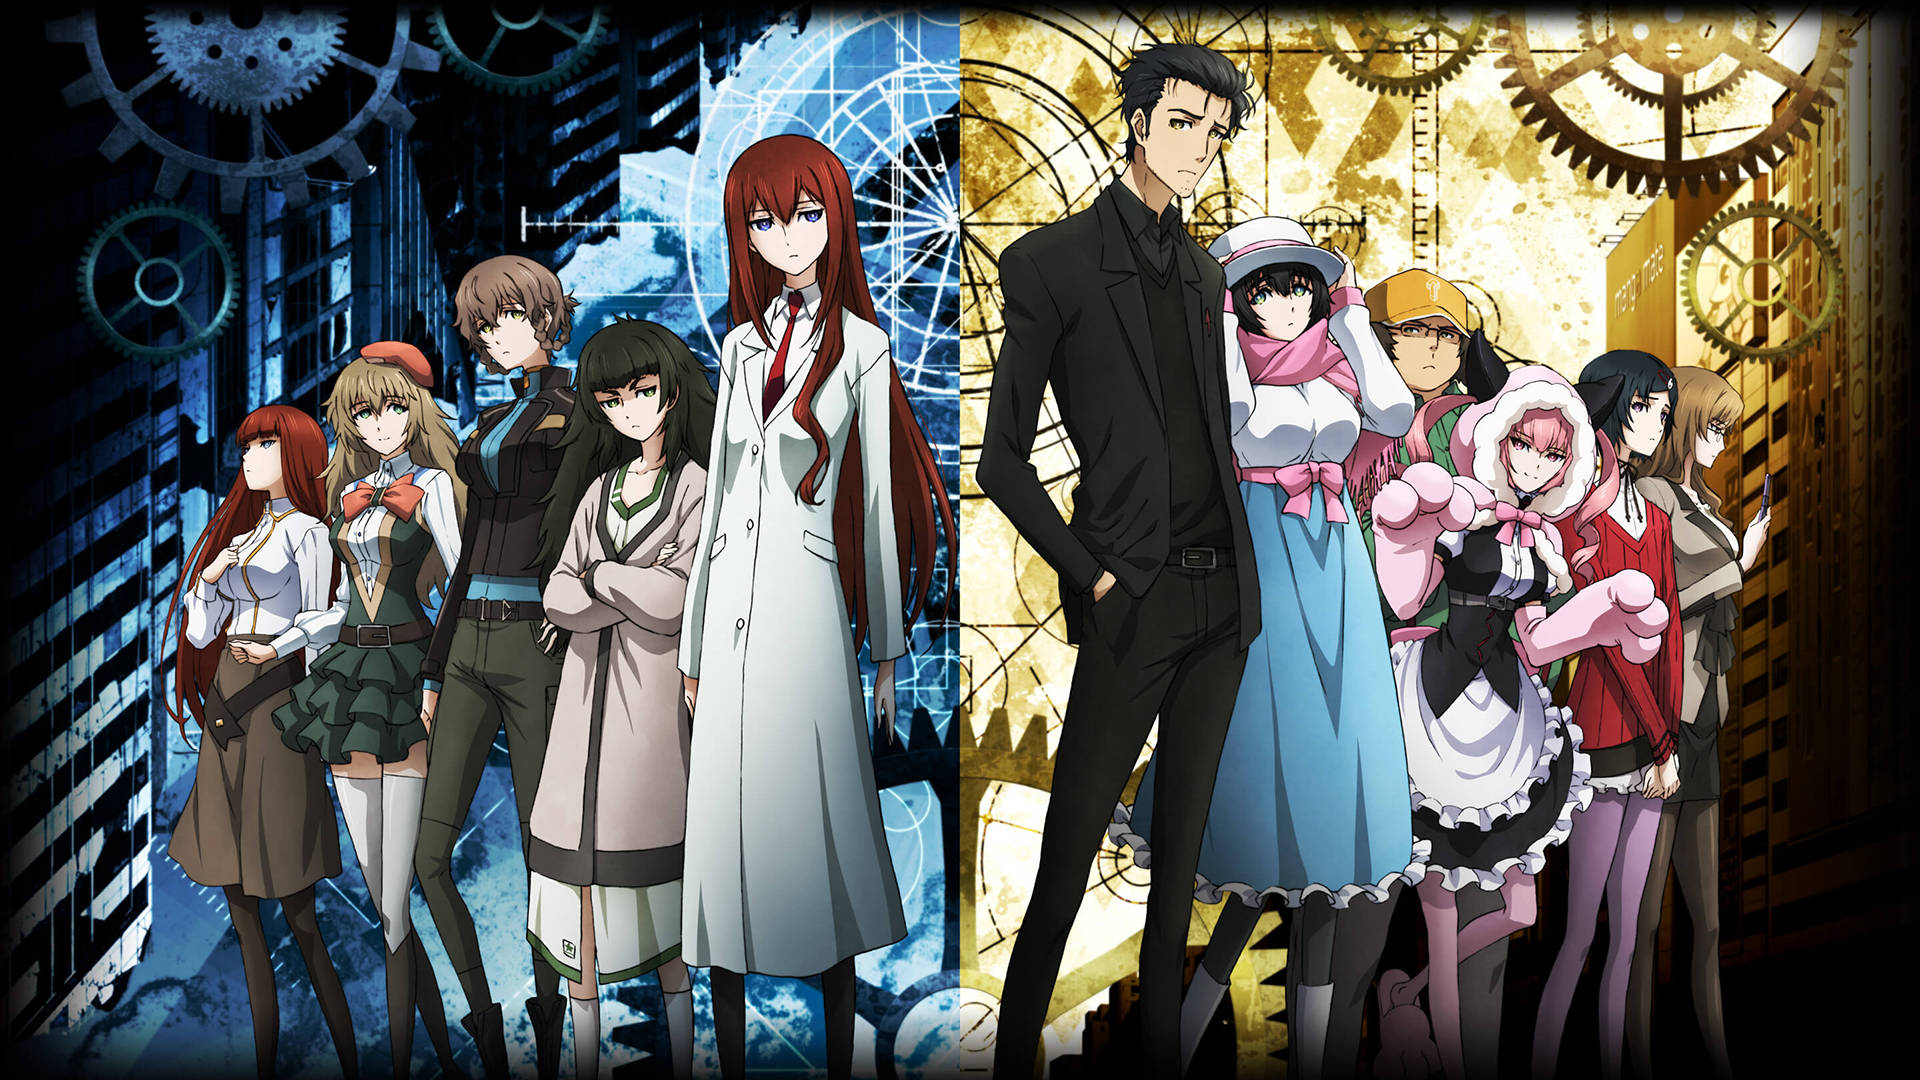 Steins Gate Stylish Outfits Background